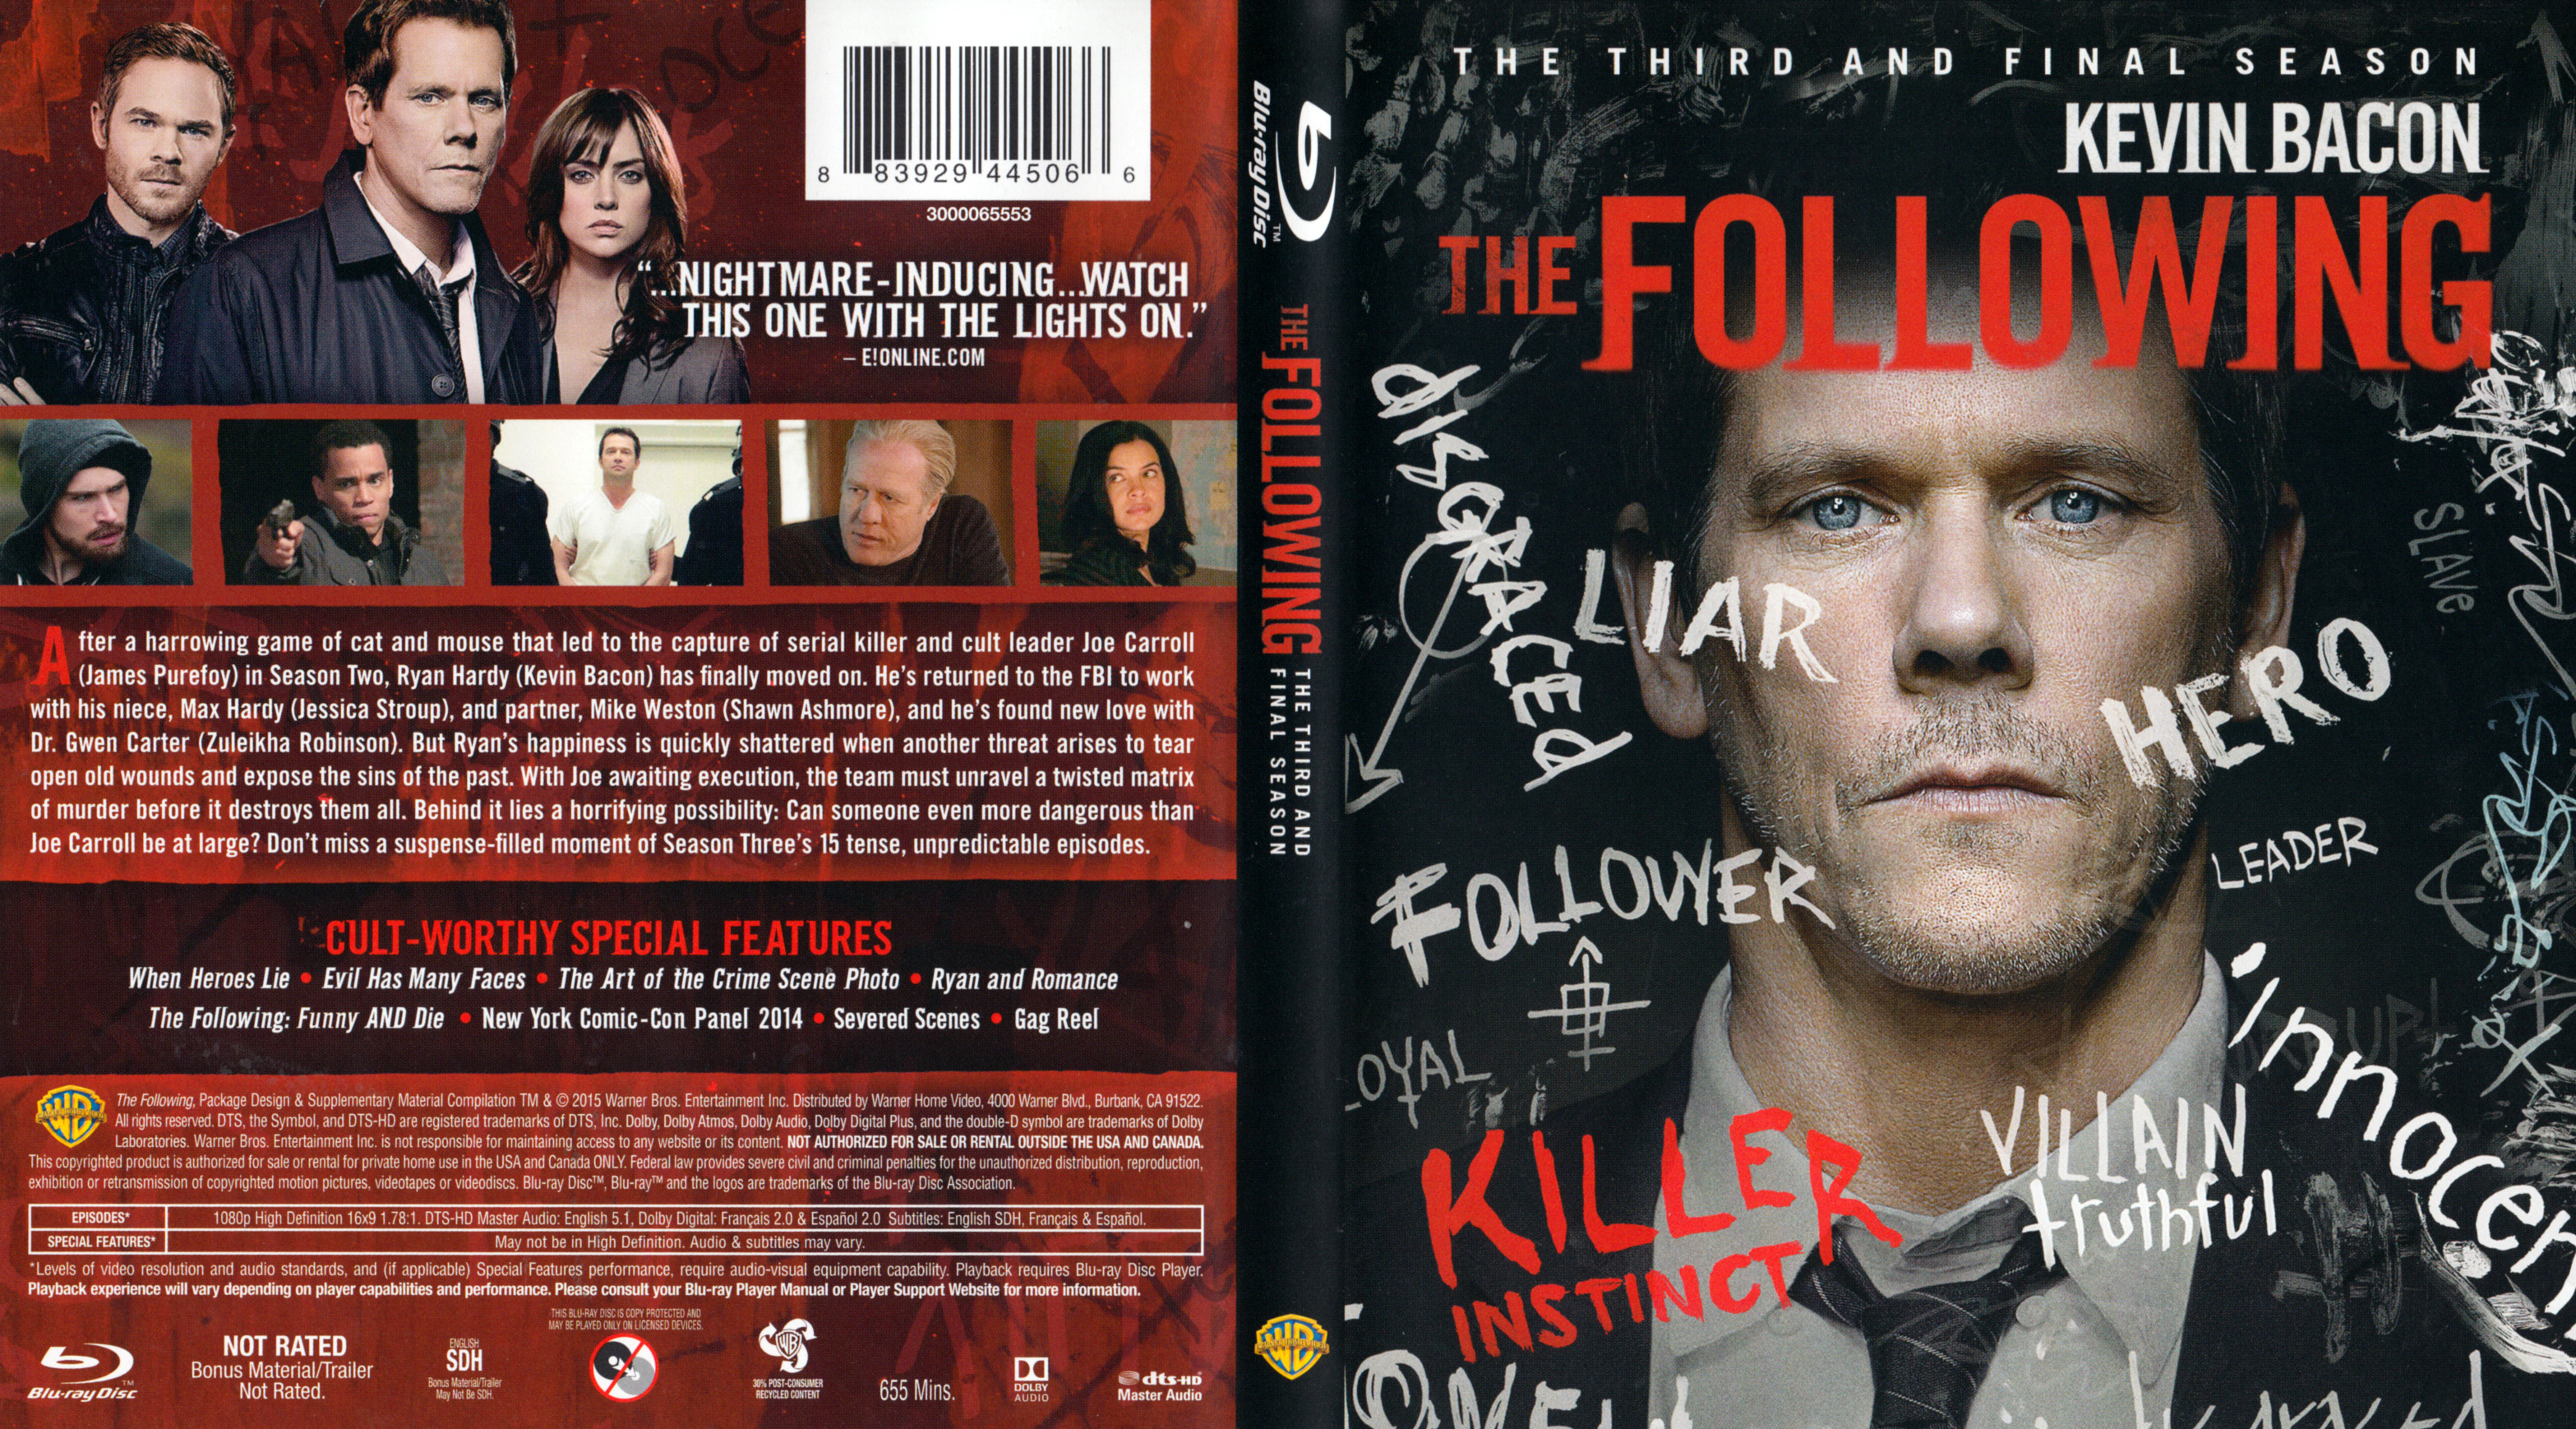 Jaquette DVD The following Saison 3 Zone 1 (BLU-RAY)